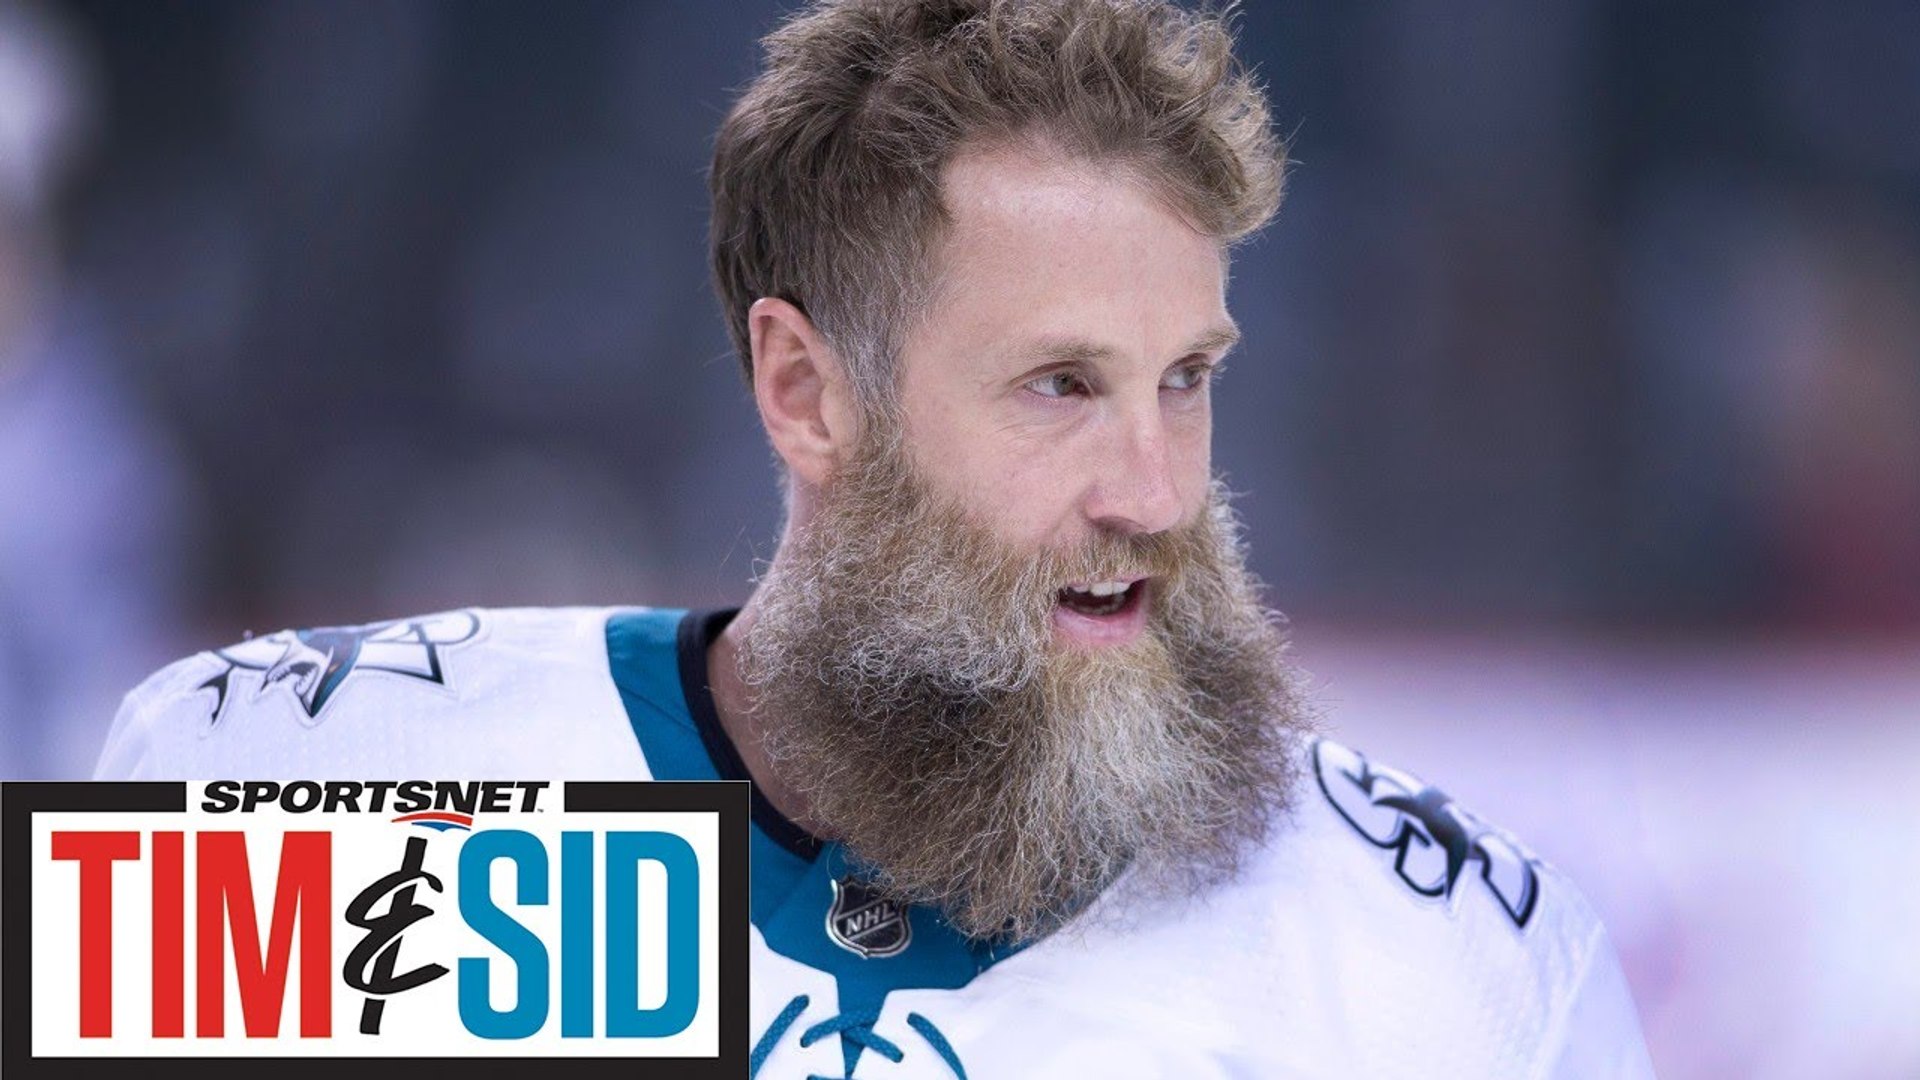 OUCH! Joe Thornton Gets His Beard RIPPED Off During Fight with Nazem Kadri  